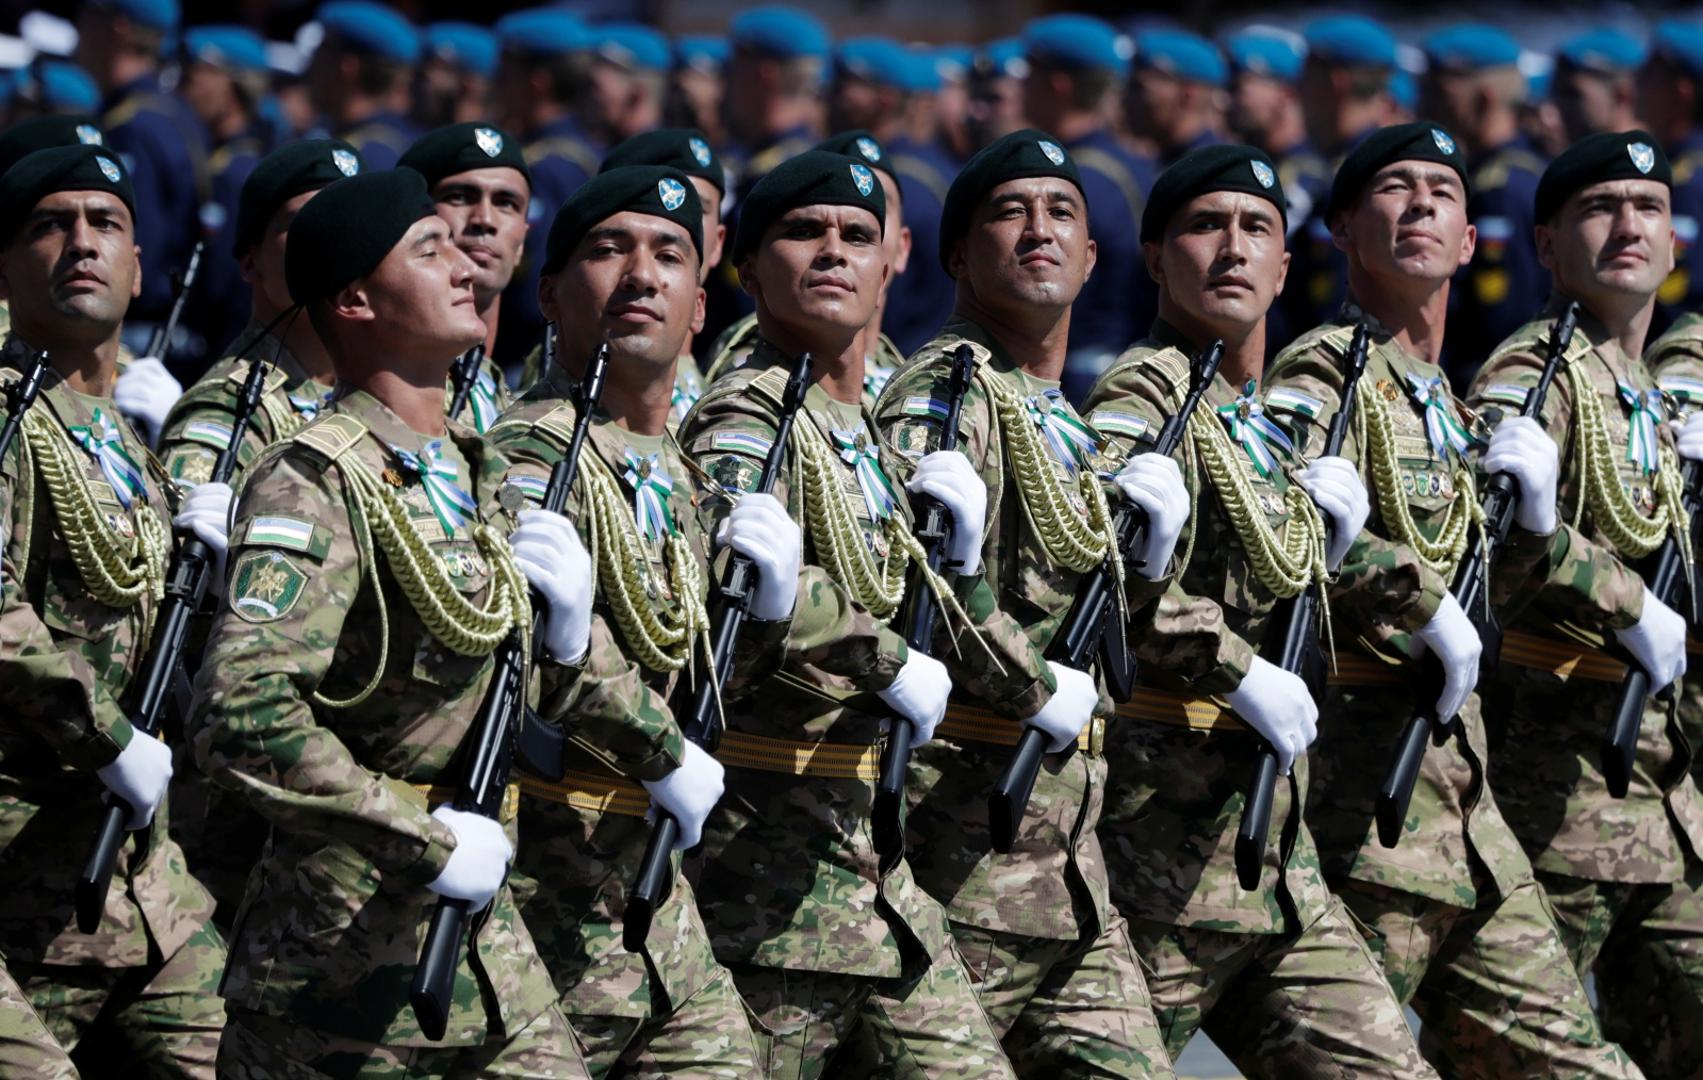 Victory Day Parade in Moscow Soldiers of the army of Uzbekistan march during the Victory Day Parade in Red Square in Moscow, Russia, June 24, 2020. The military parade, marking the 75th anniversary of the victory over Nazi Germany in World War Two, was scheduled for May 9 but postponed due to the outbreak of the coronavirus disease (COVID-19). Pavel Golovkin/Pool via REUTERS POOL